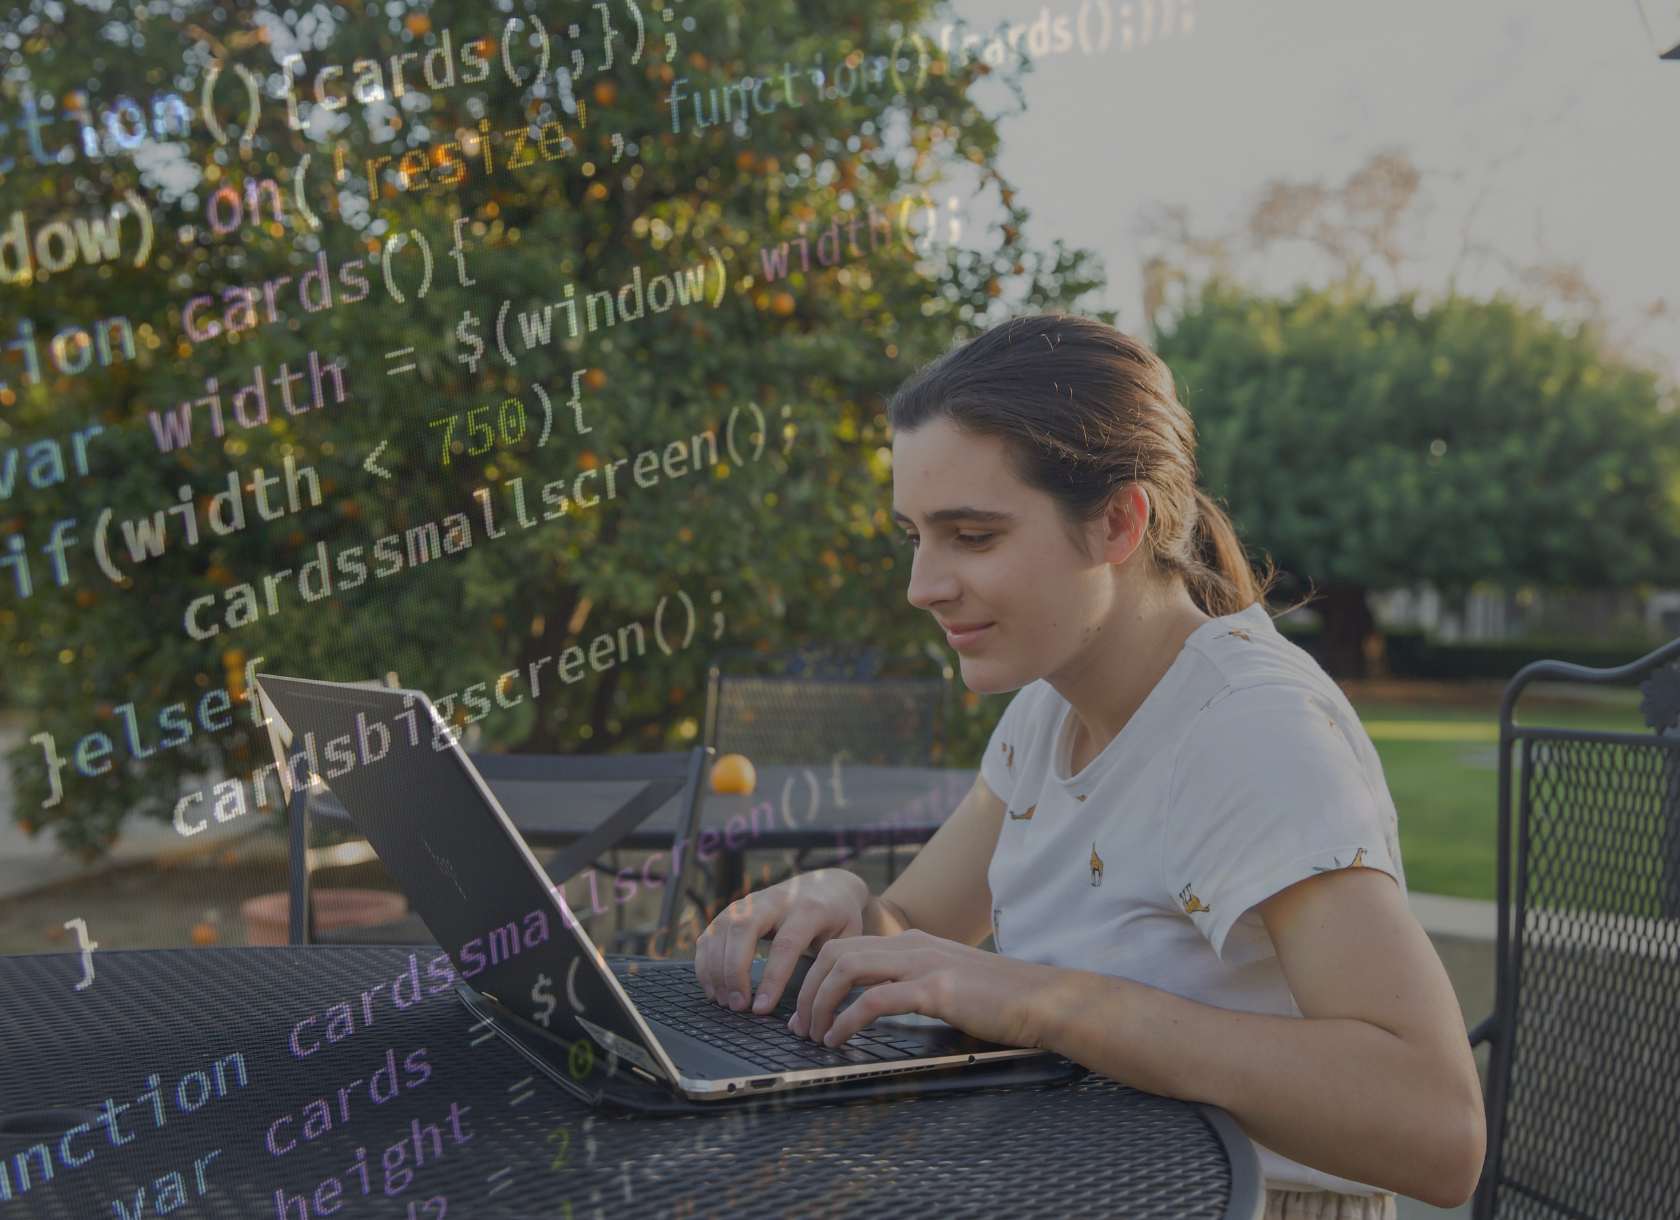 A Scripps student works on a computer with an overlay of programming language text